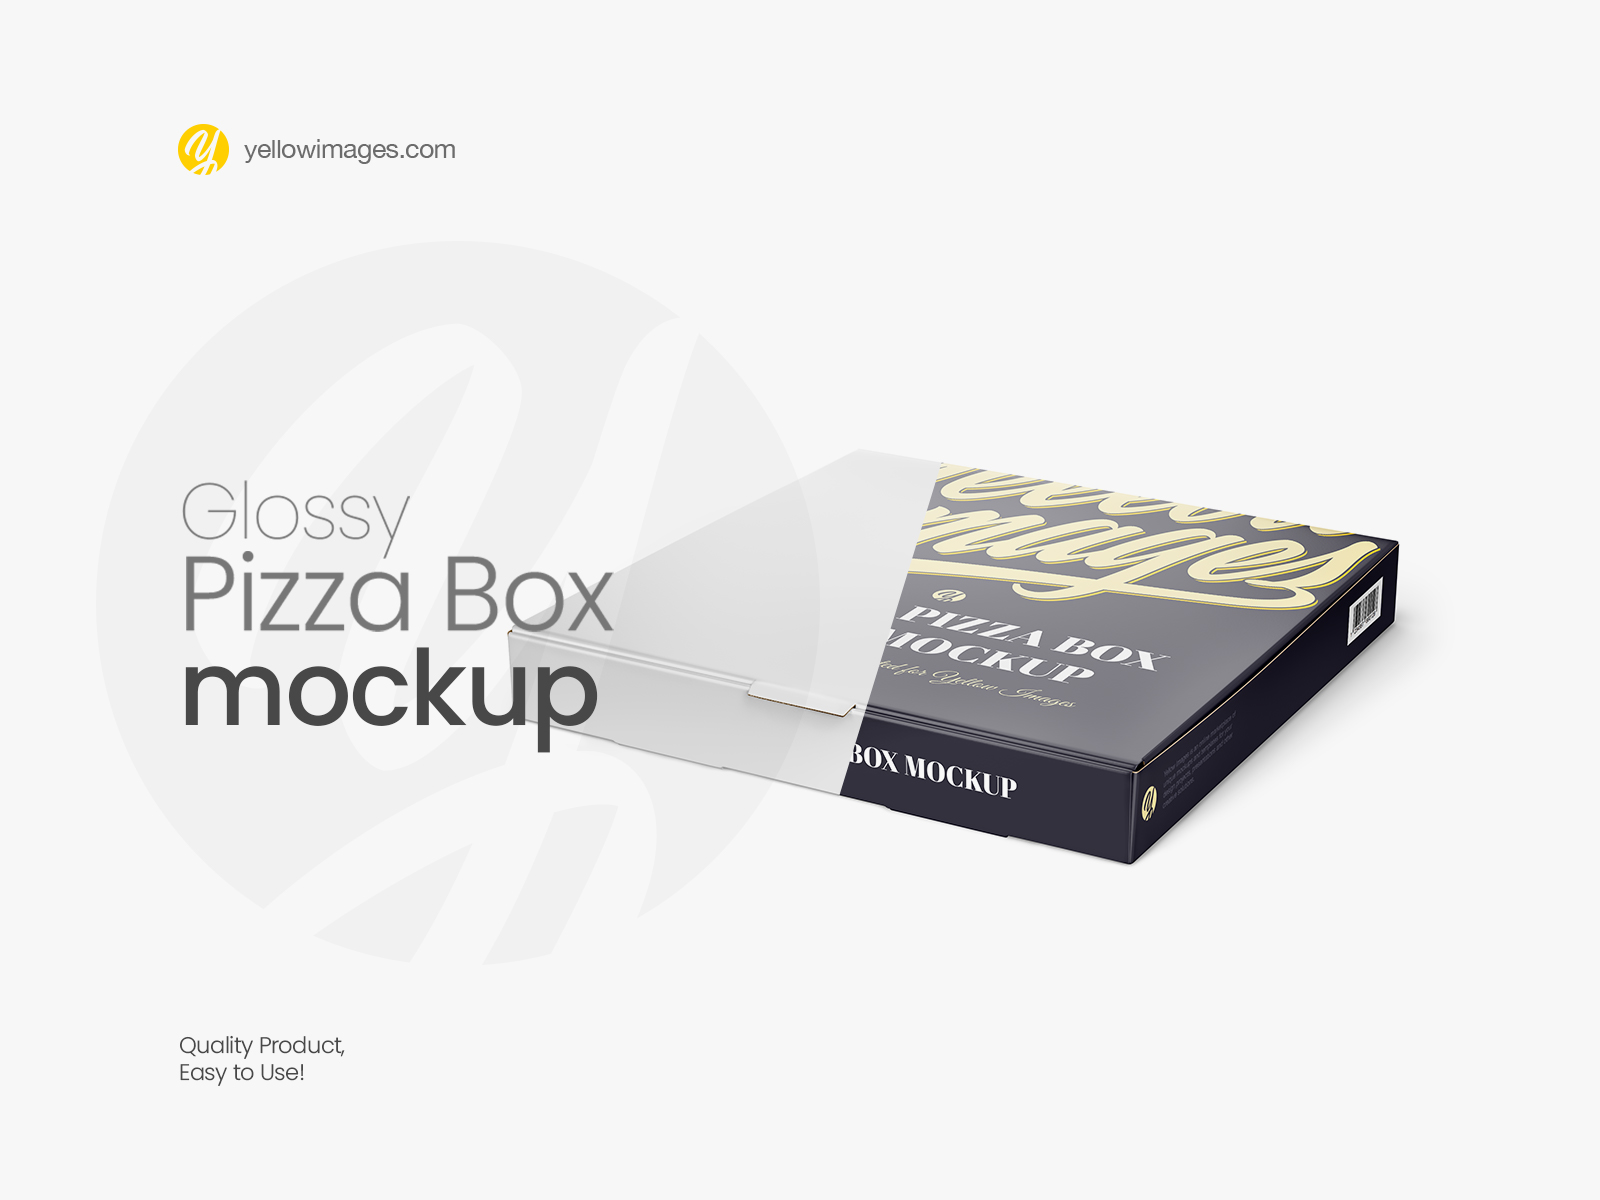 Download Food Branding Mockup Download Free And Premium Packaging Mockup Psd Templates And Design Assets Yellowimages Mockups